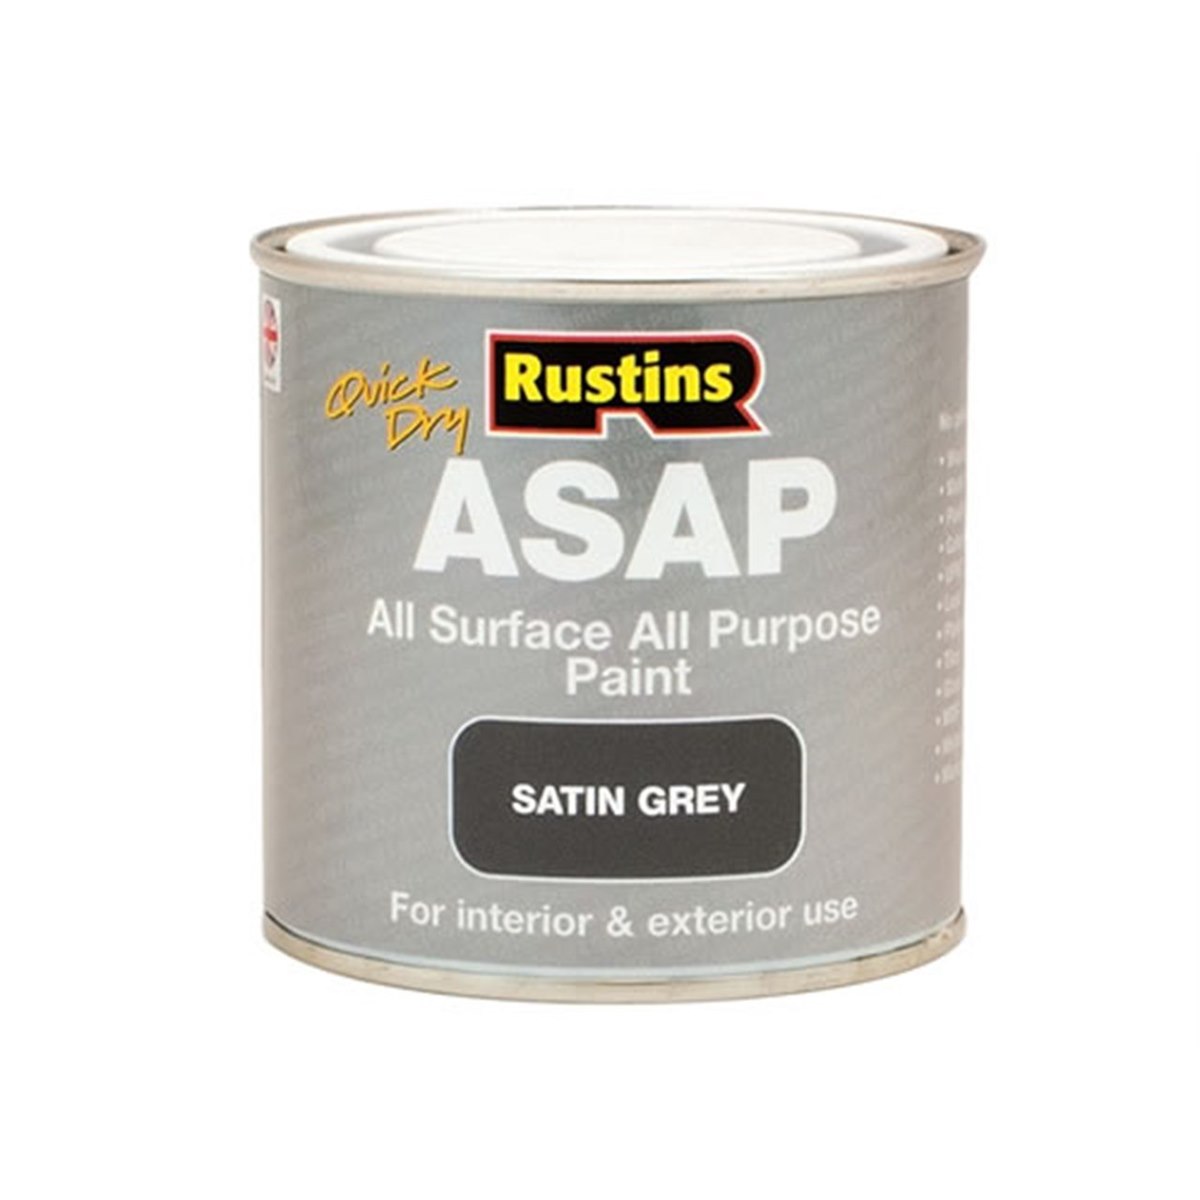 Rustins Quick Dry All Surface All Purpose Paint (ASAP) Grey 1 Litre